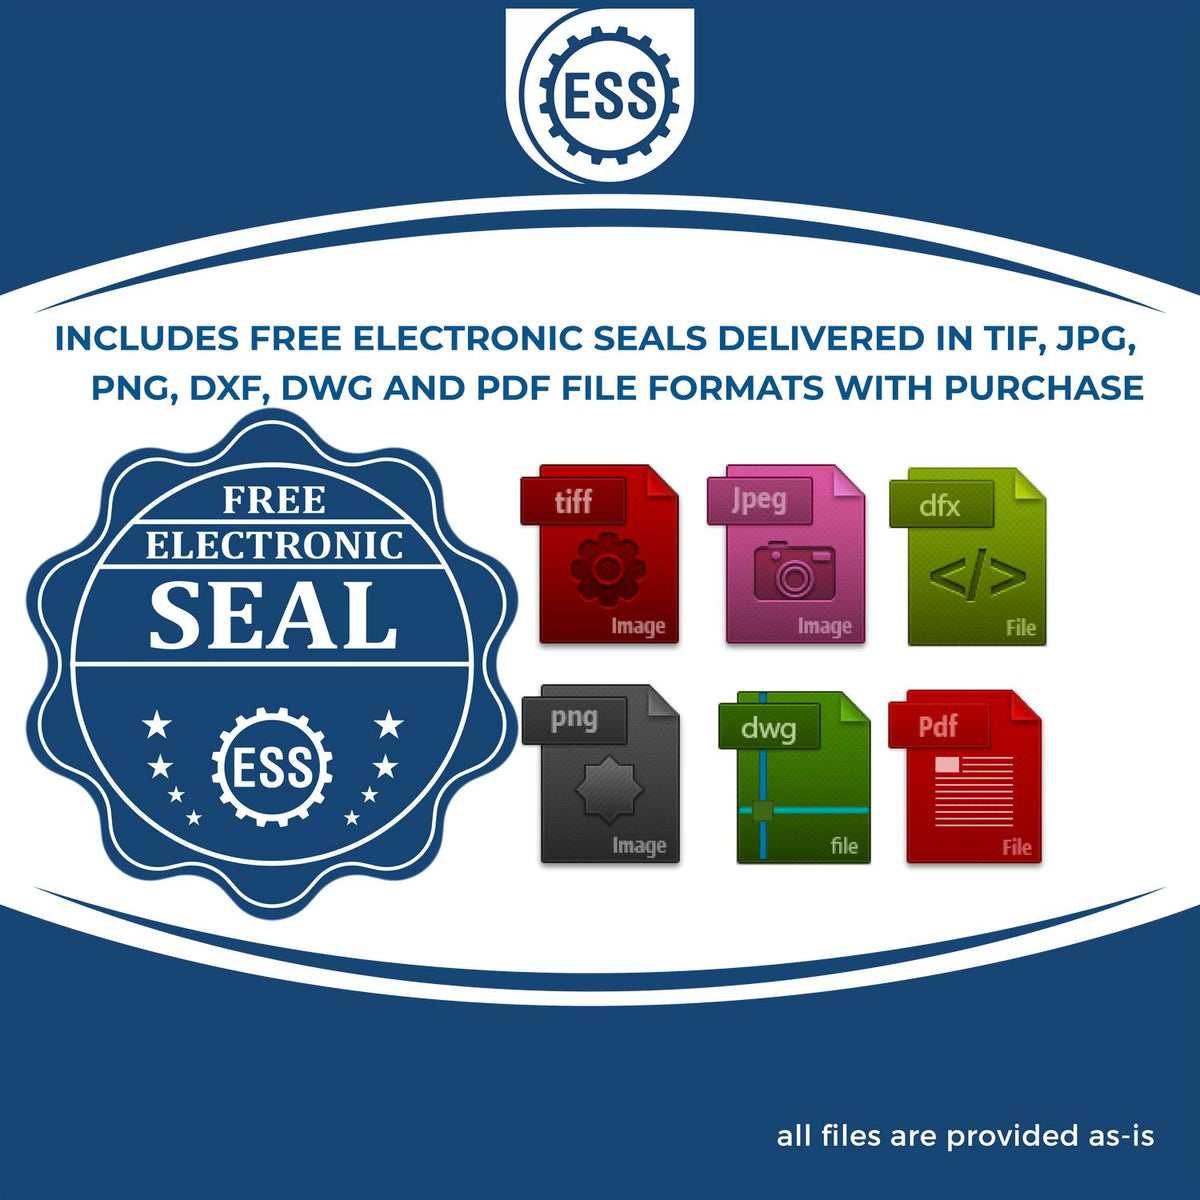 An infographic for the free electronic seal for the Heavy Duty Cast Iron Idaho Land Surveyor Seal Embosser illustrating the different file type icons such as DXF, DWG, TIF, JPG and PNG.